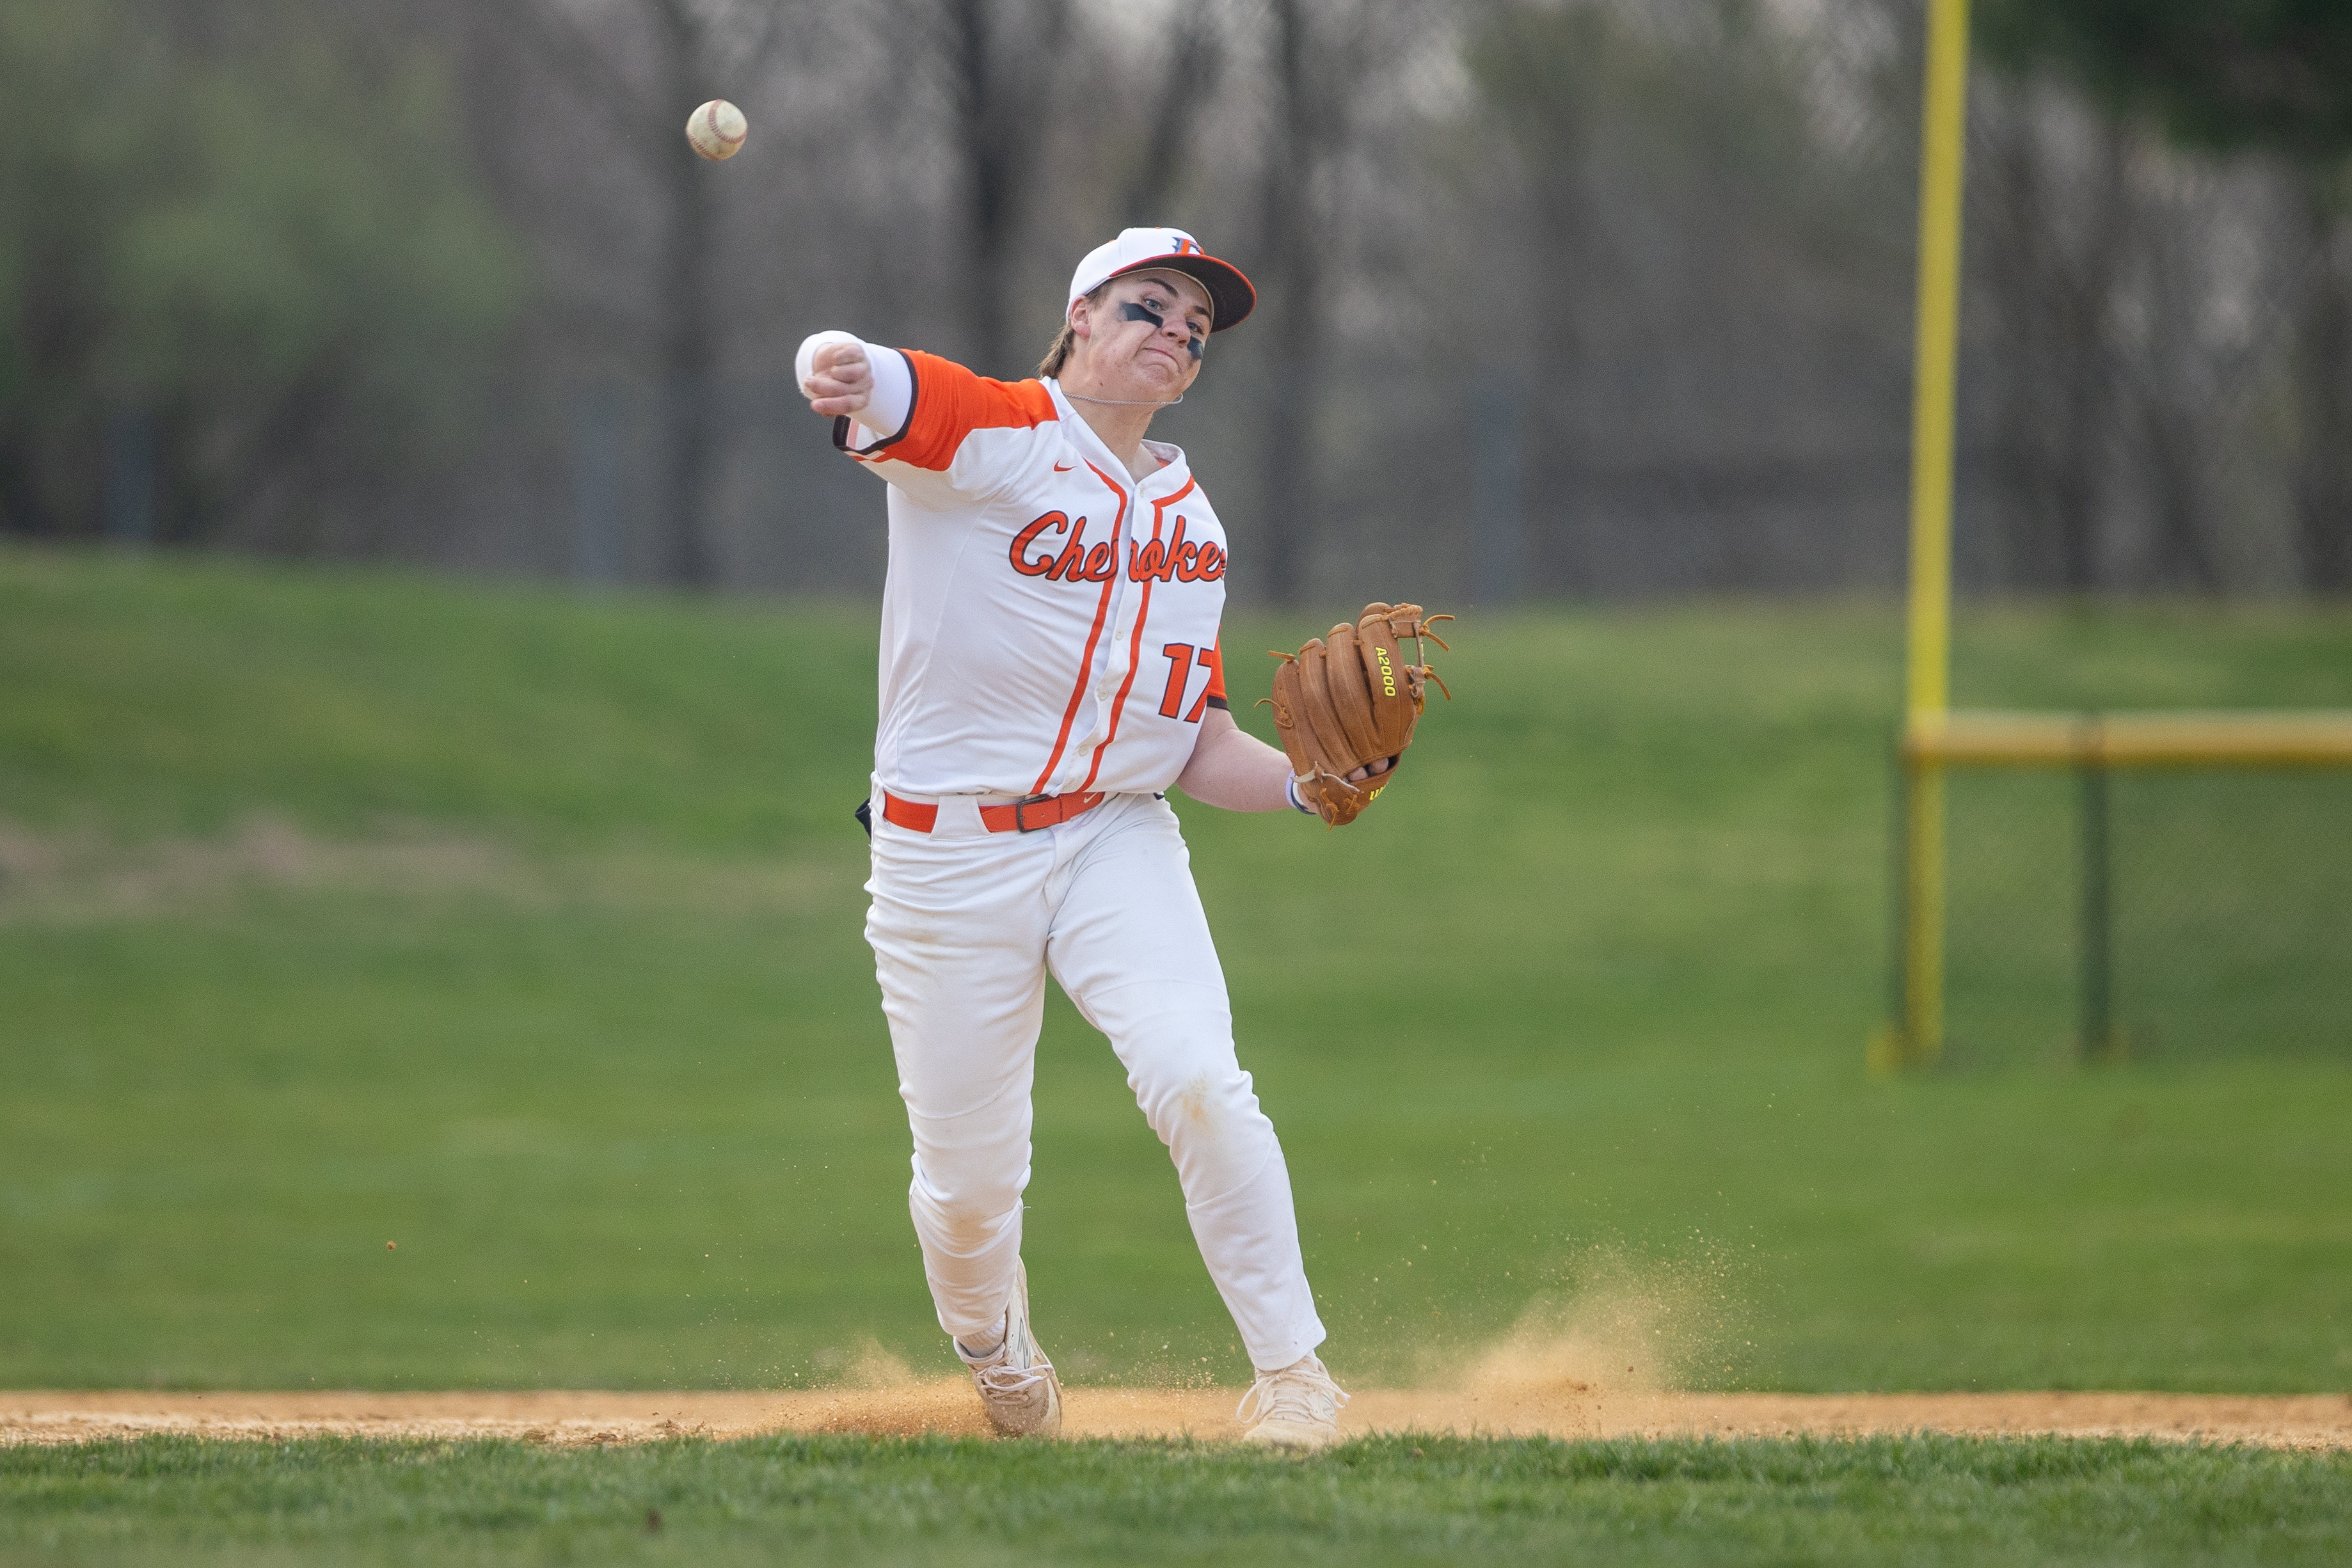 Brett Chiesa (17) of Cherokee, makes a play to first in Marlton, NJ on Monday, April 3, 2023.